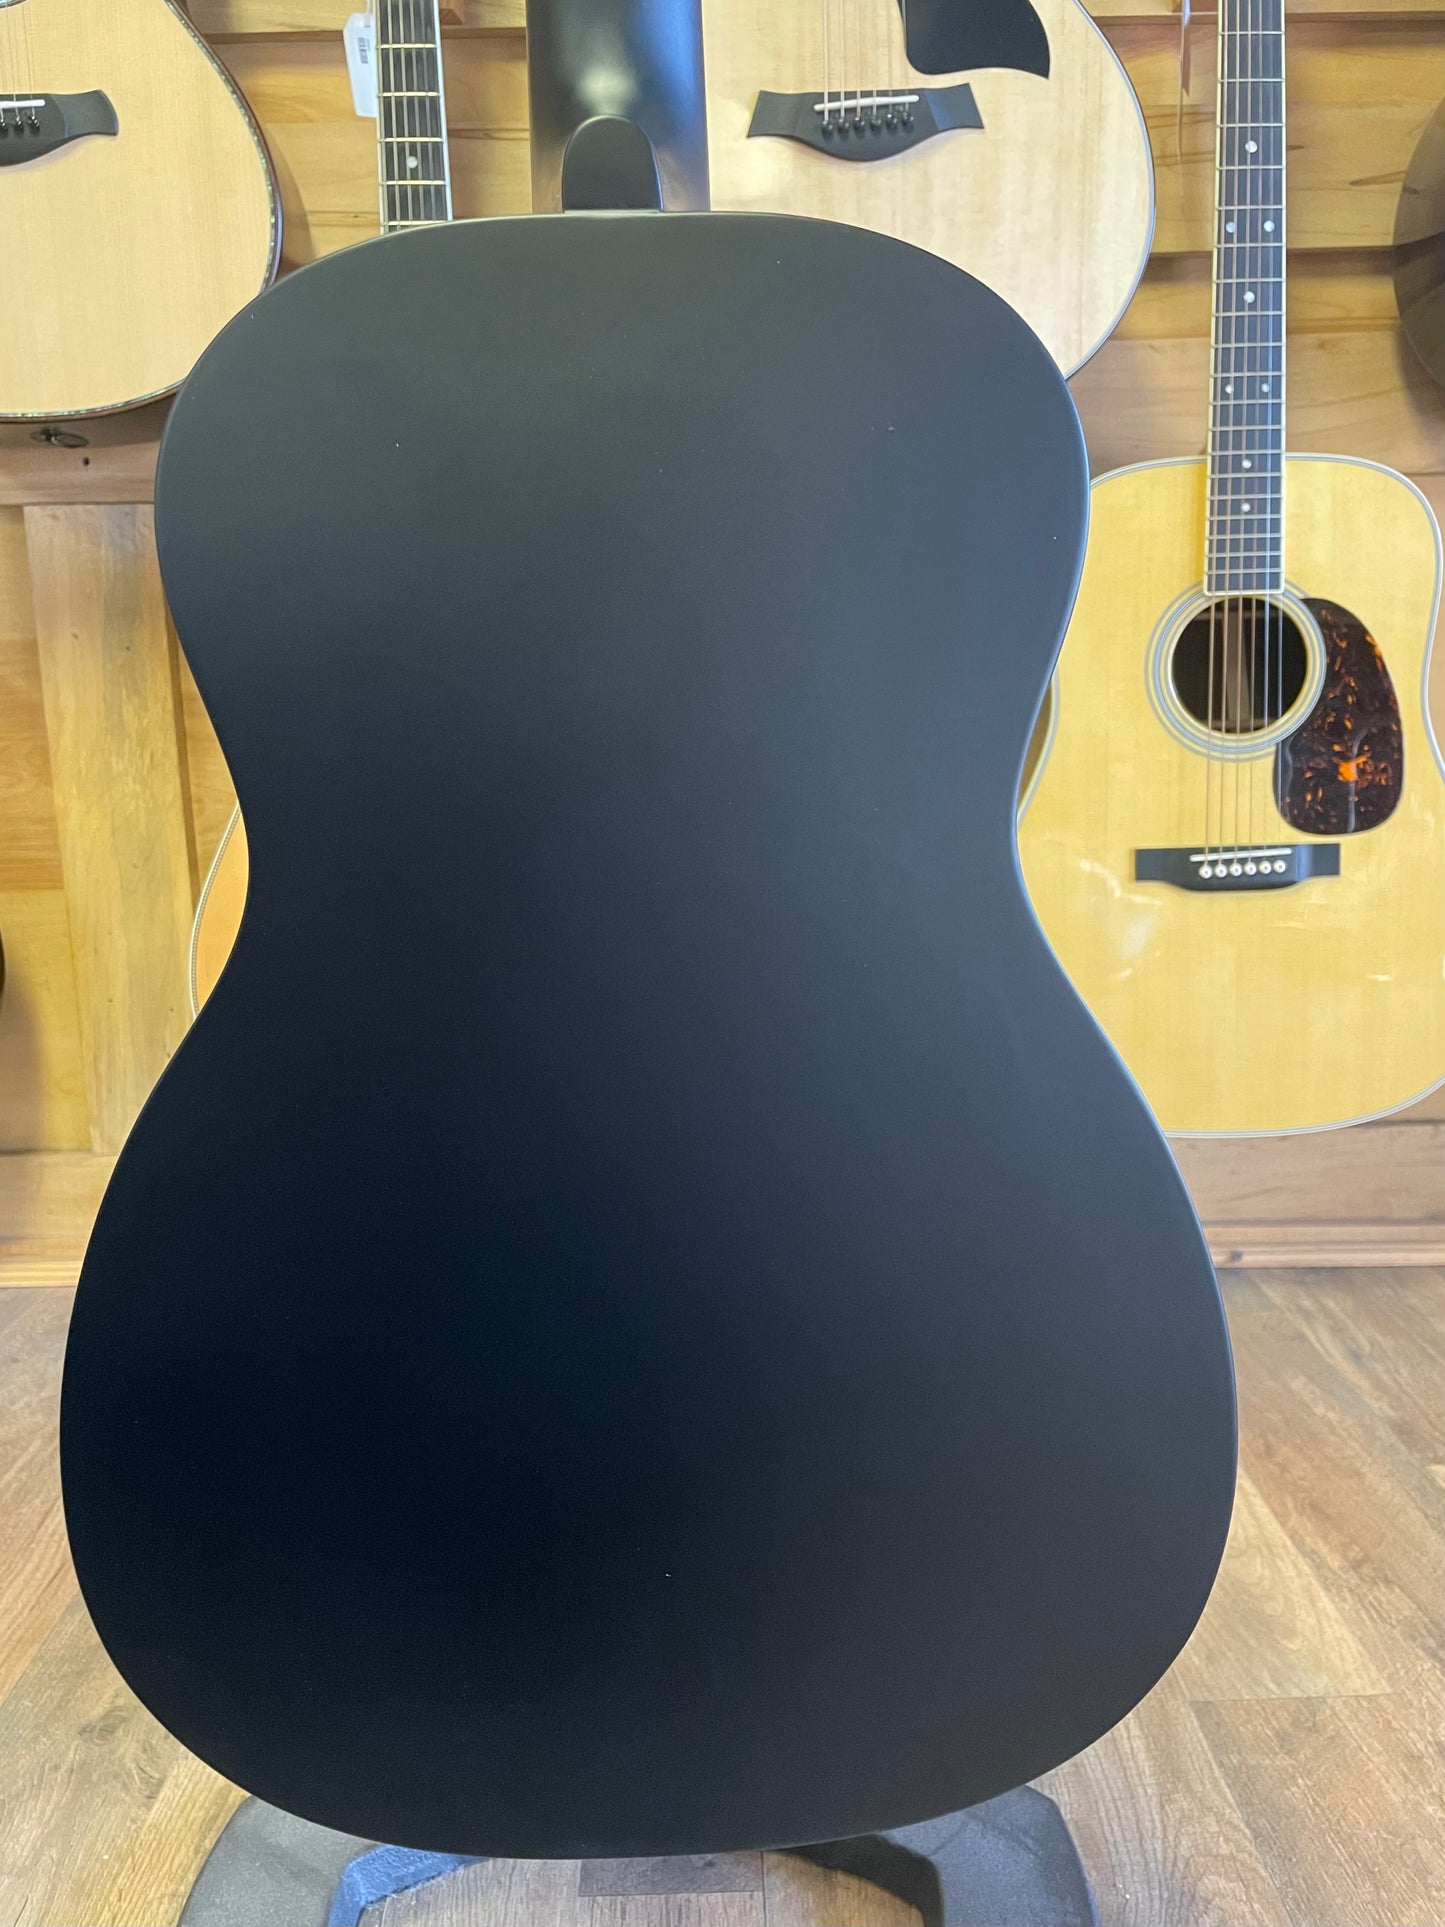 Gretsch G9520E Gin Rickey Acoustic Guitar with Electronics - Smokestack Black (NEW)